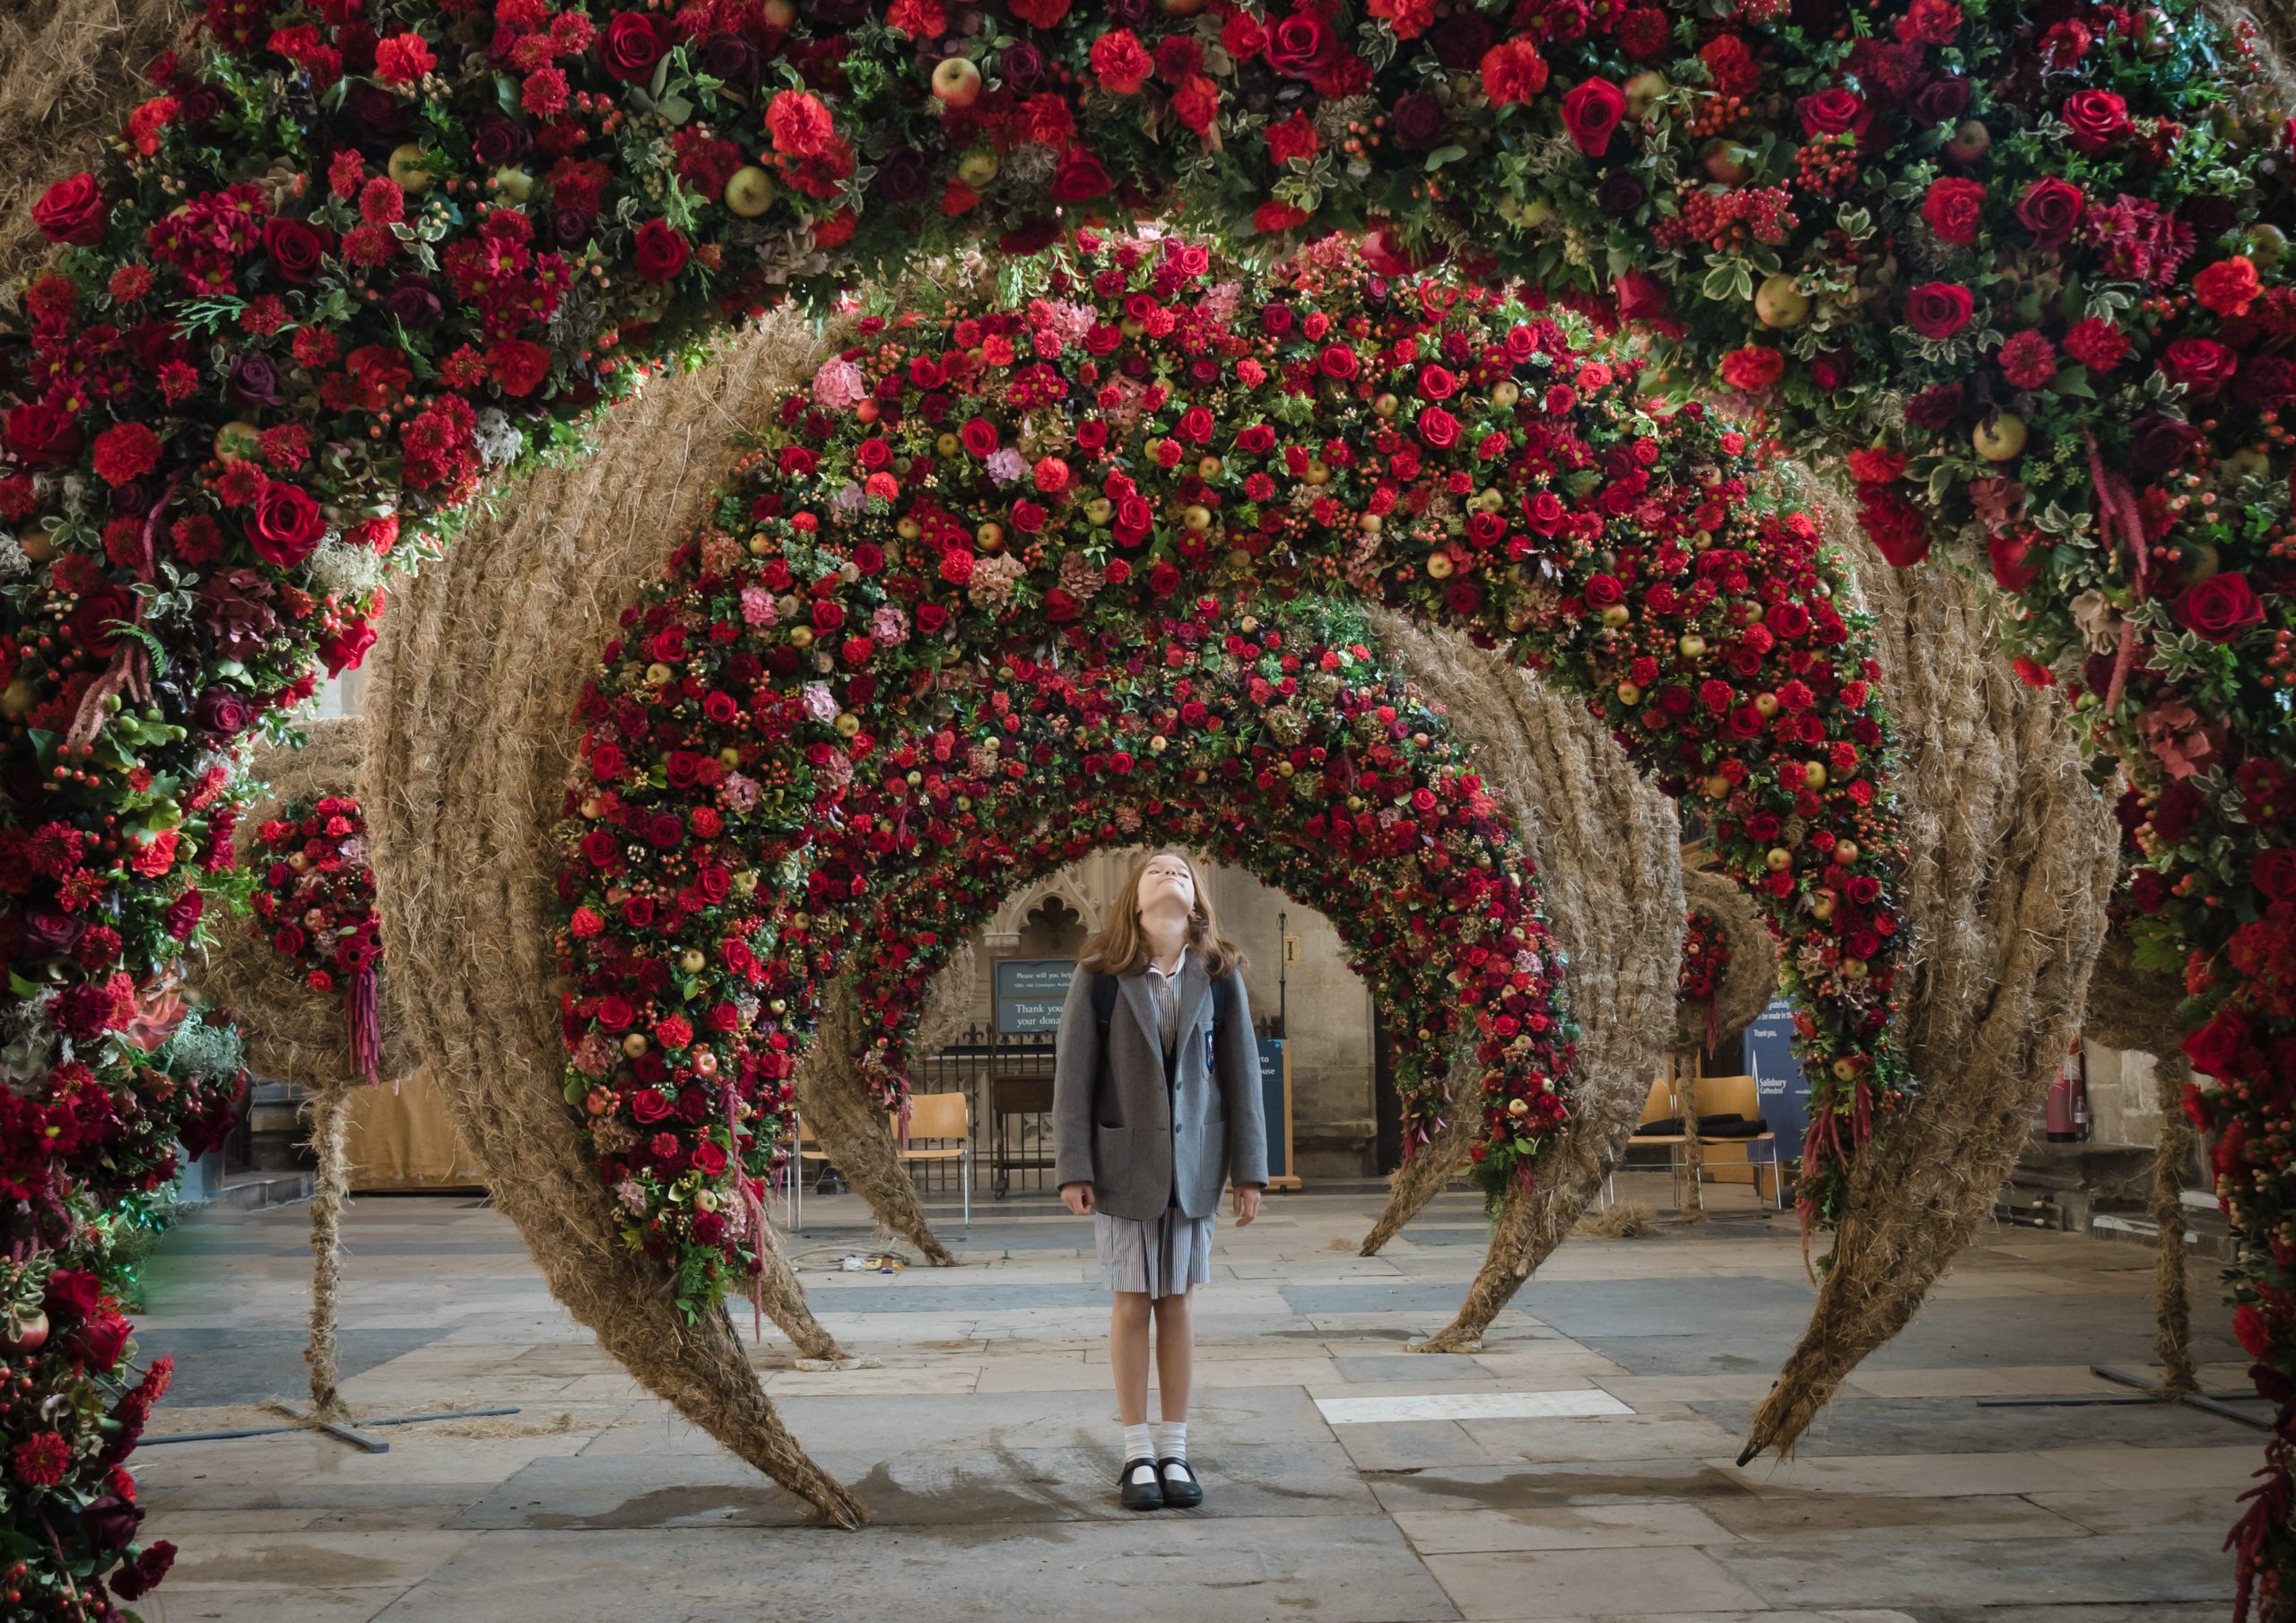 Hundreds attend 2022 Flower Festival launch ‘in person’ and virtually